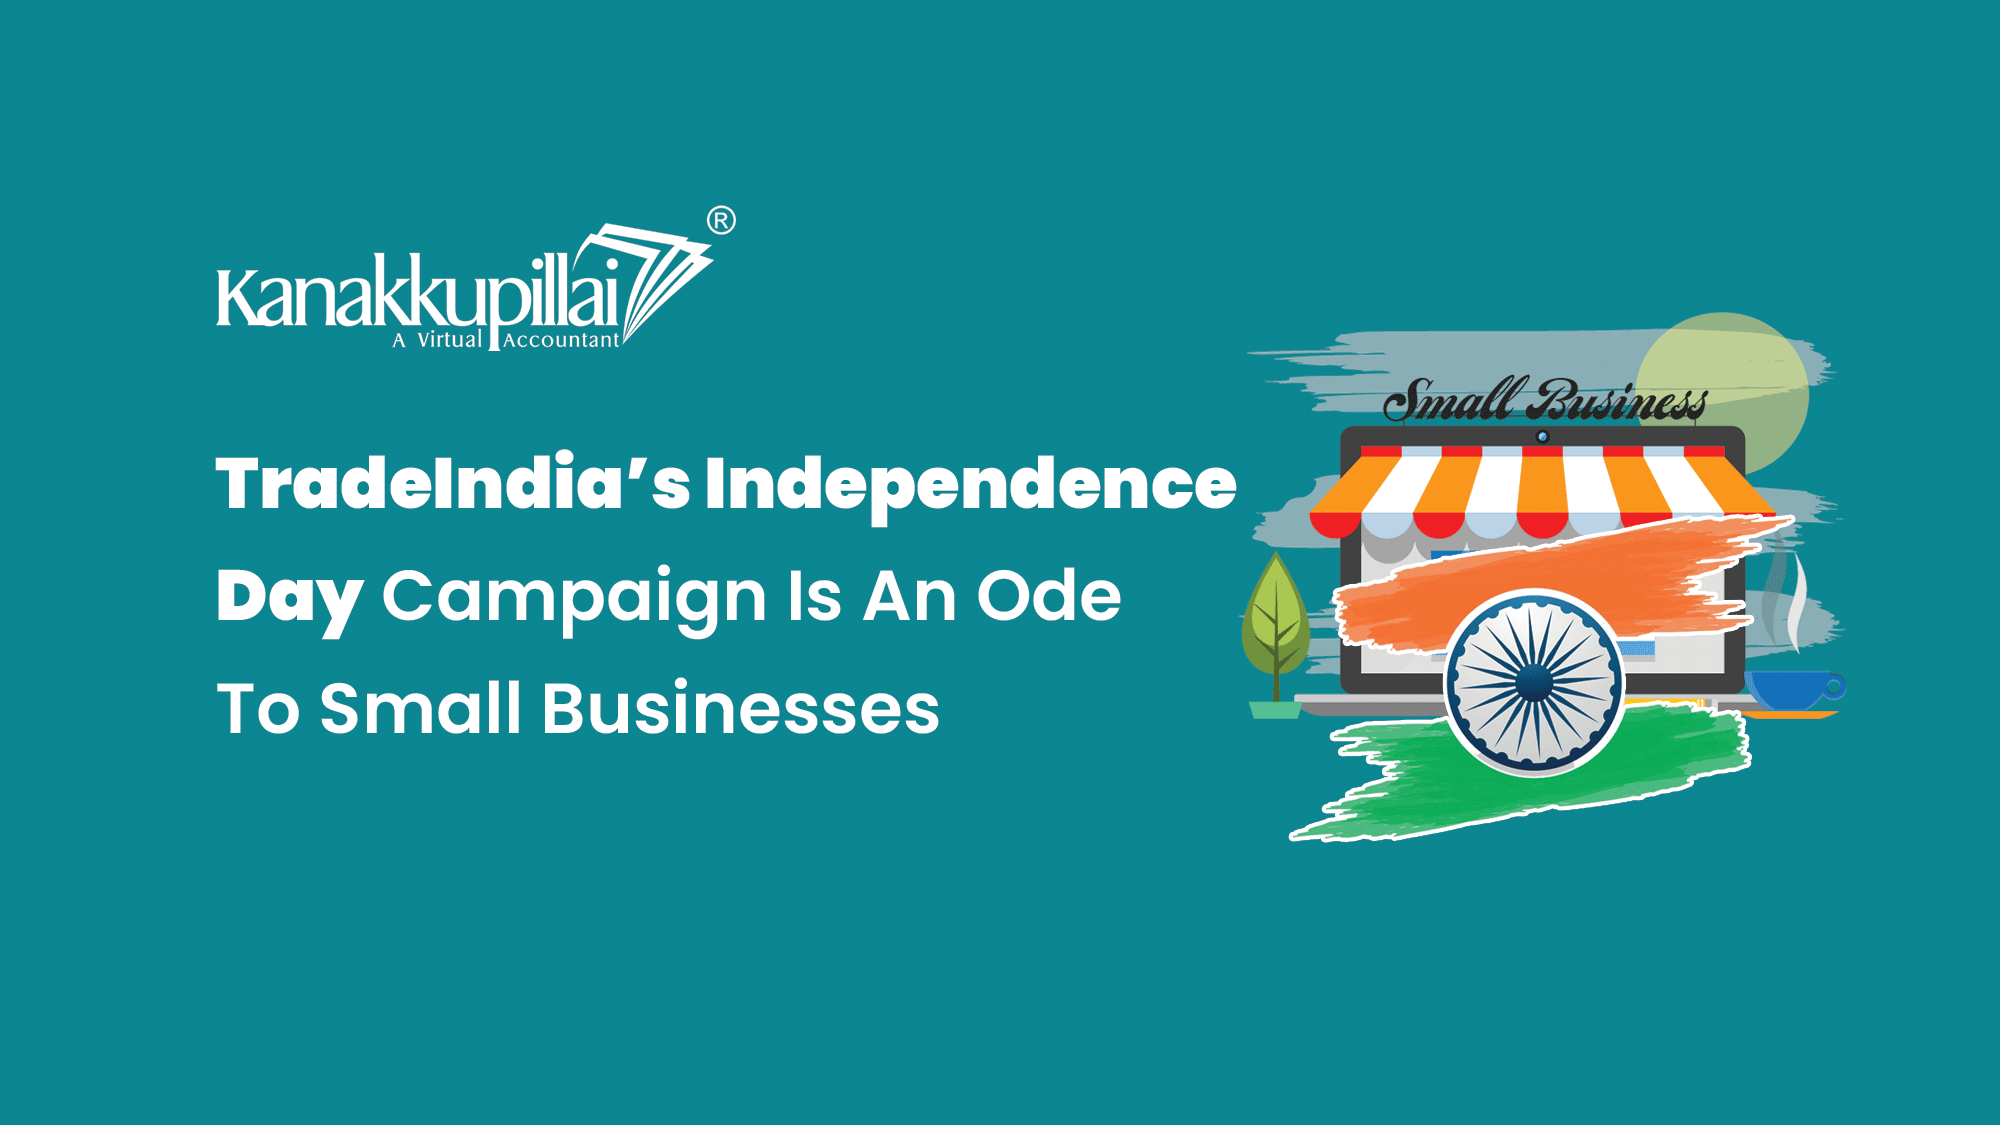 TradeIndia’s Independence Day Campaign Is An Ode To Small Businesses